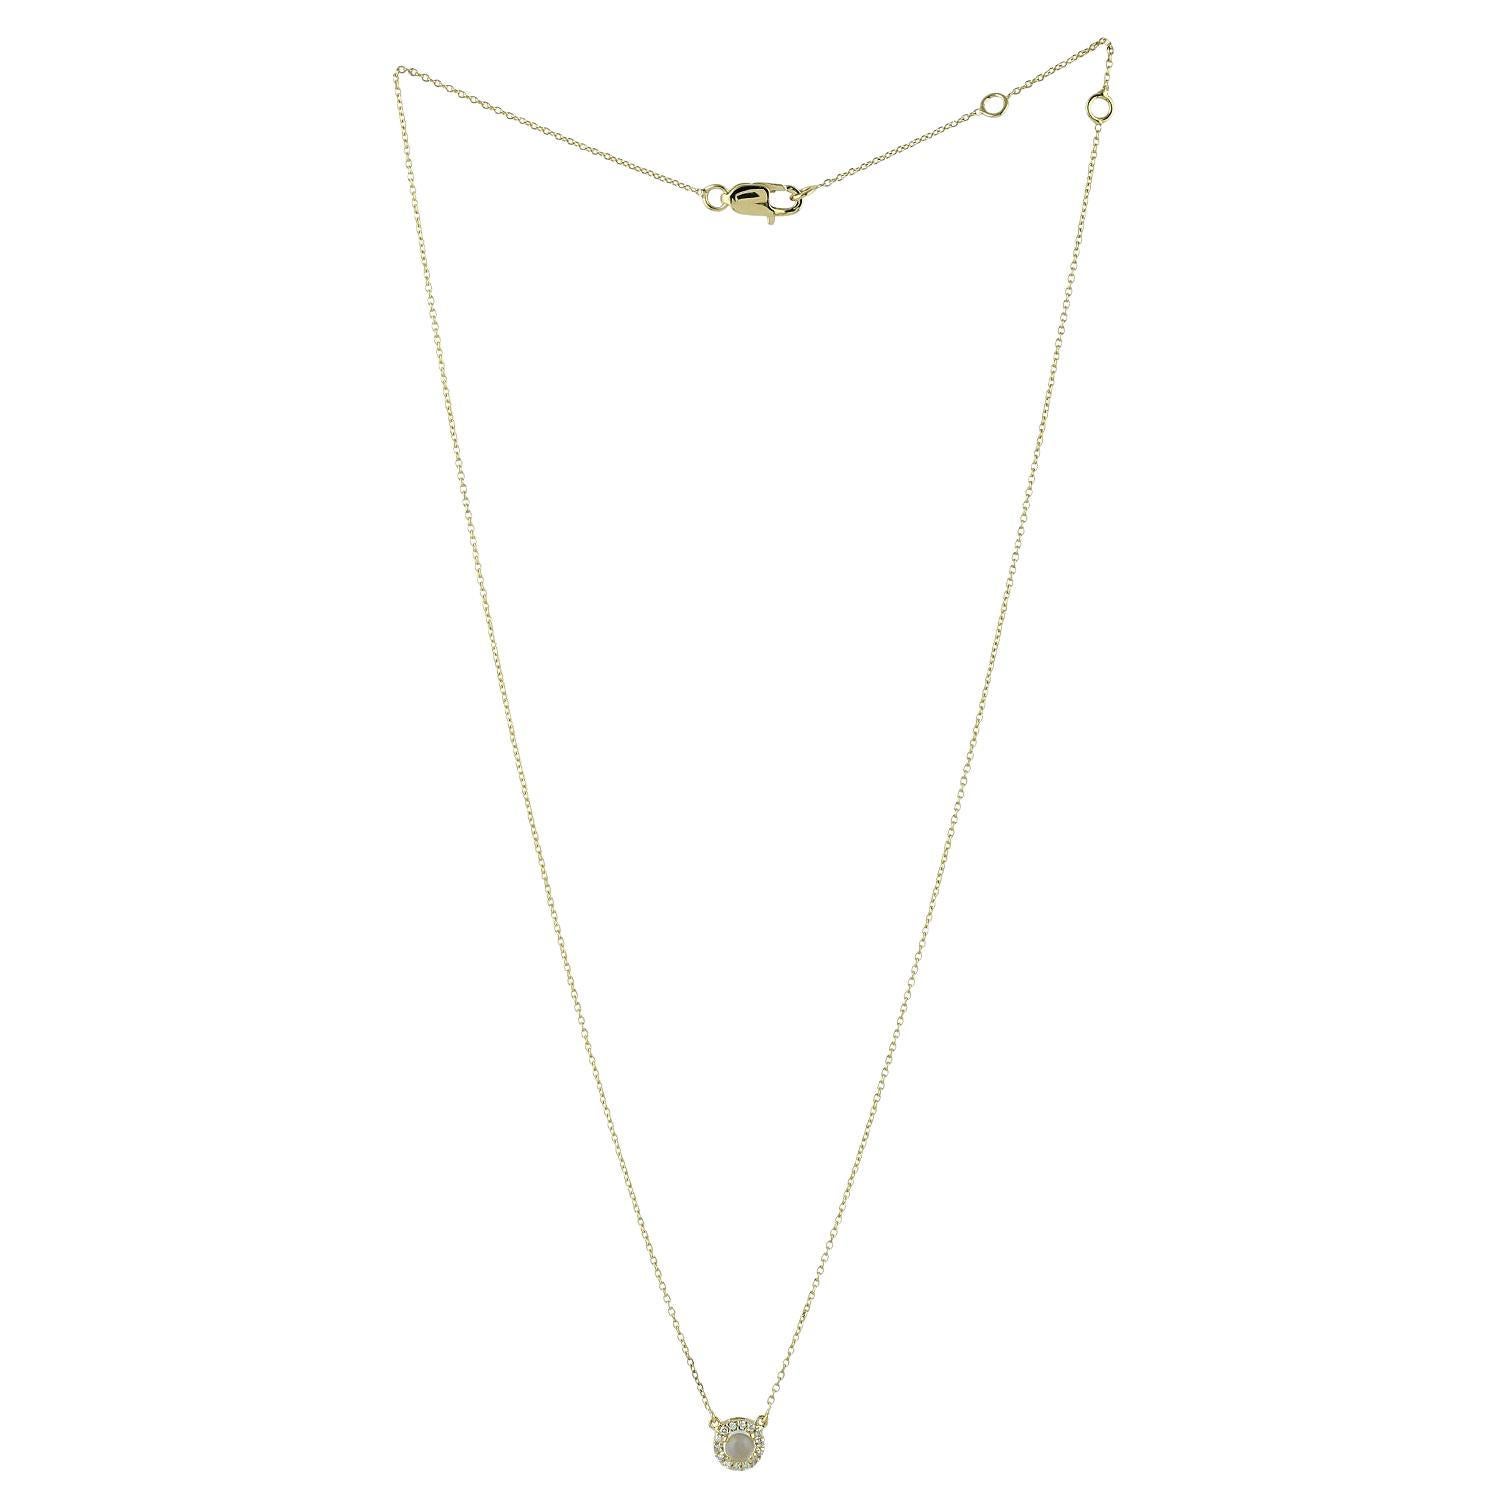 Moonstone & Pave Diamond Pendant Chain Necklace Made In 18k Yellow Gold